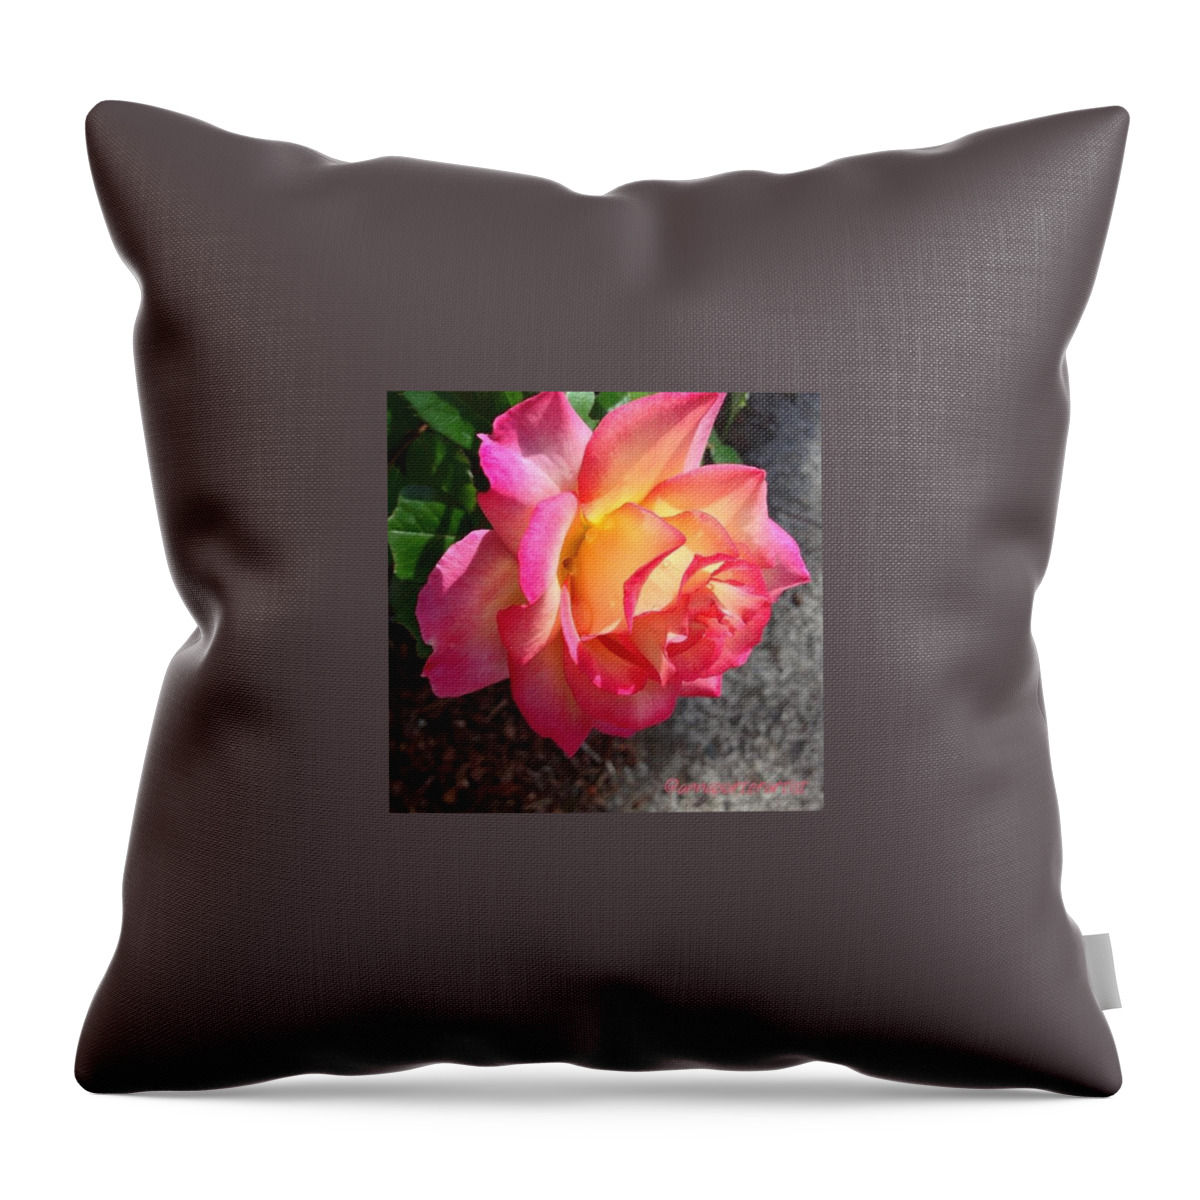 Evening Rose With Droplets Throw Pillow featuring the photograph Evening Rose With Droplets by Anna Porter